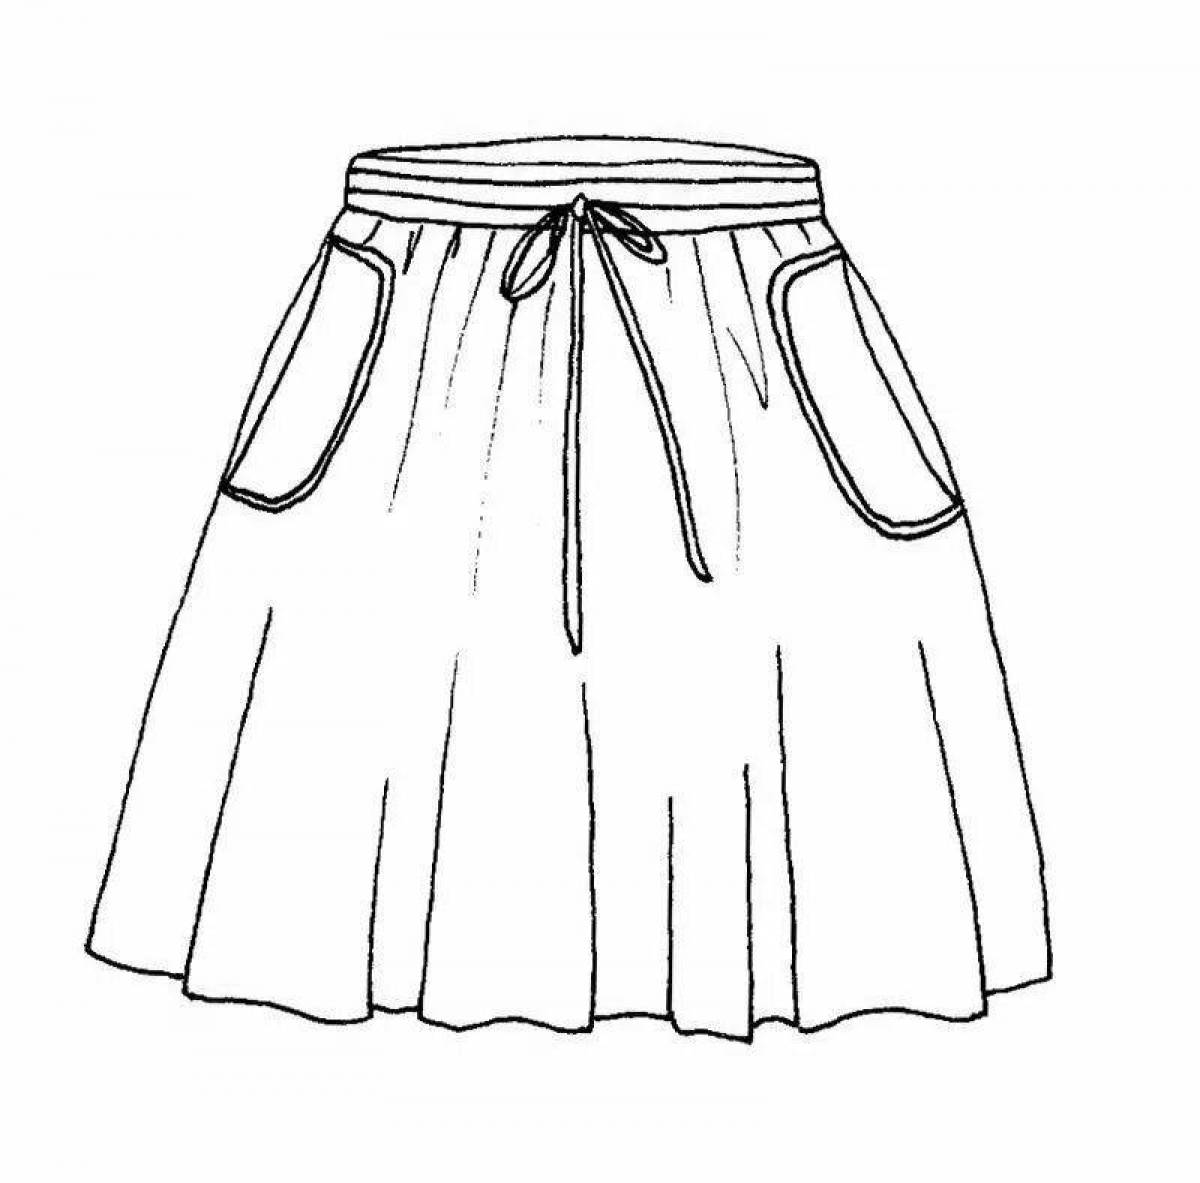 Wonderful Coloring Skirt for Toddlers